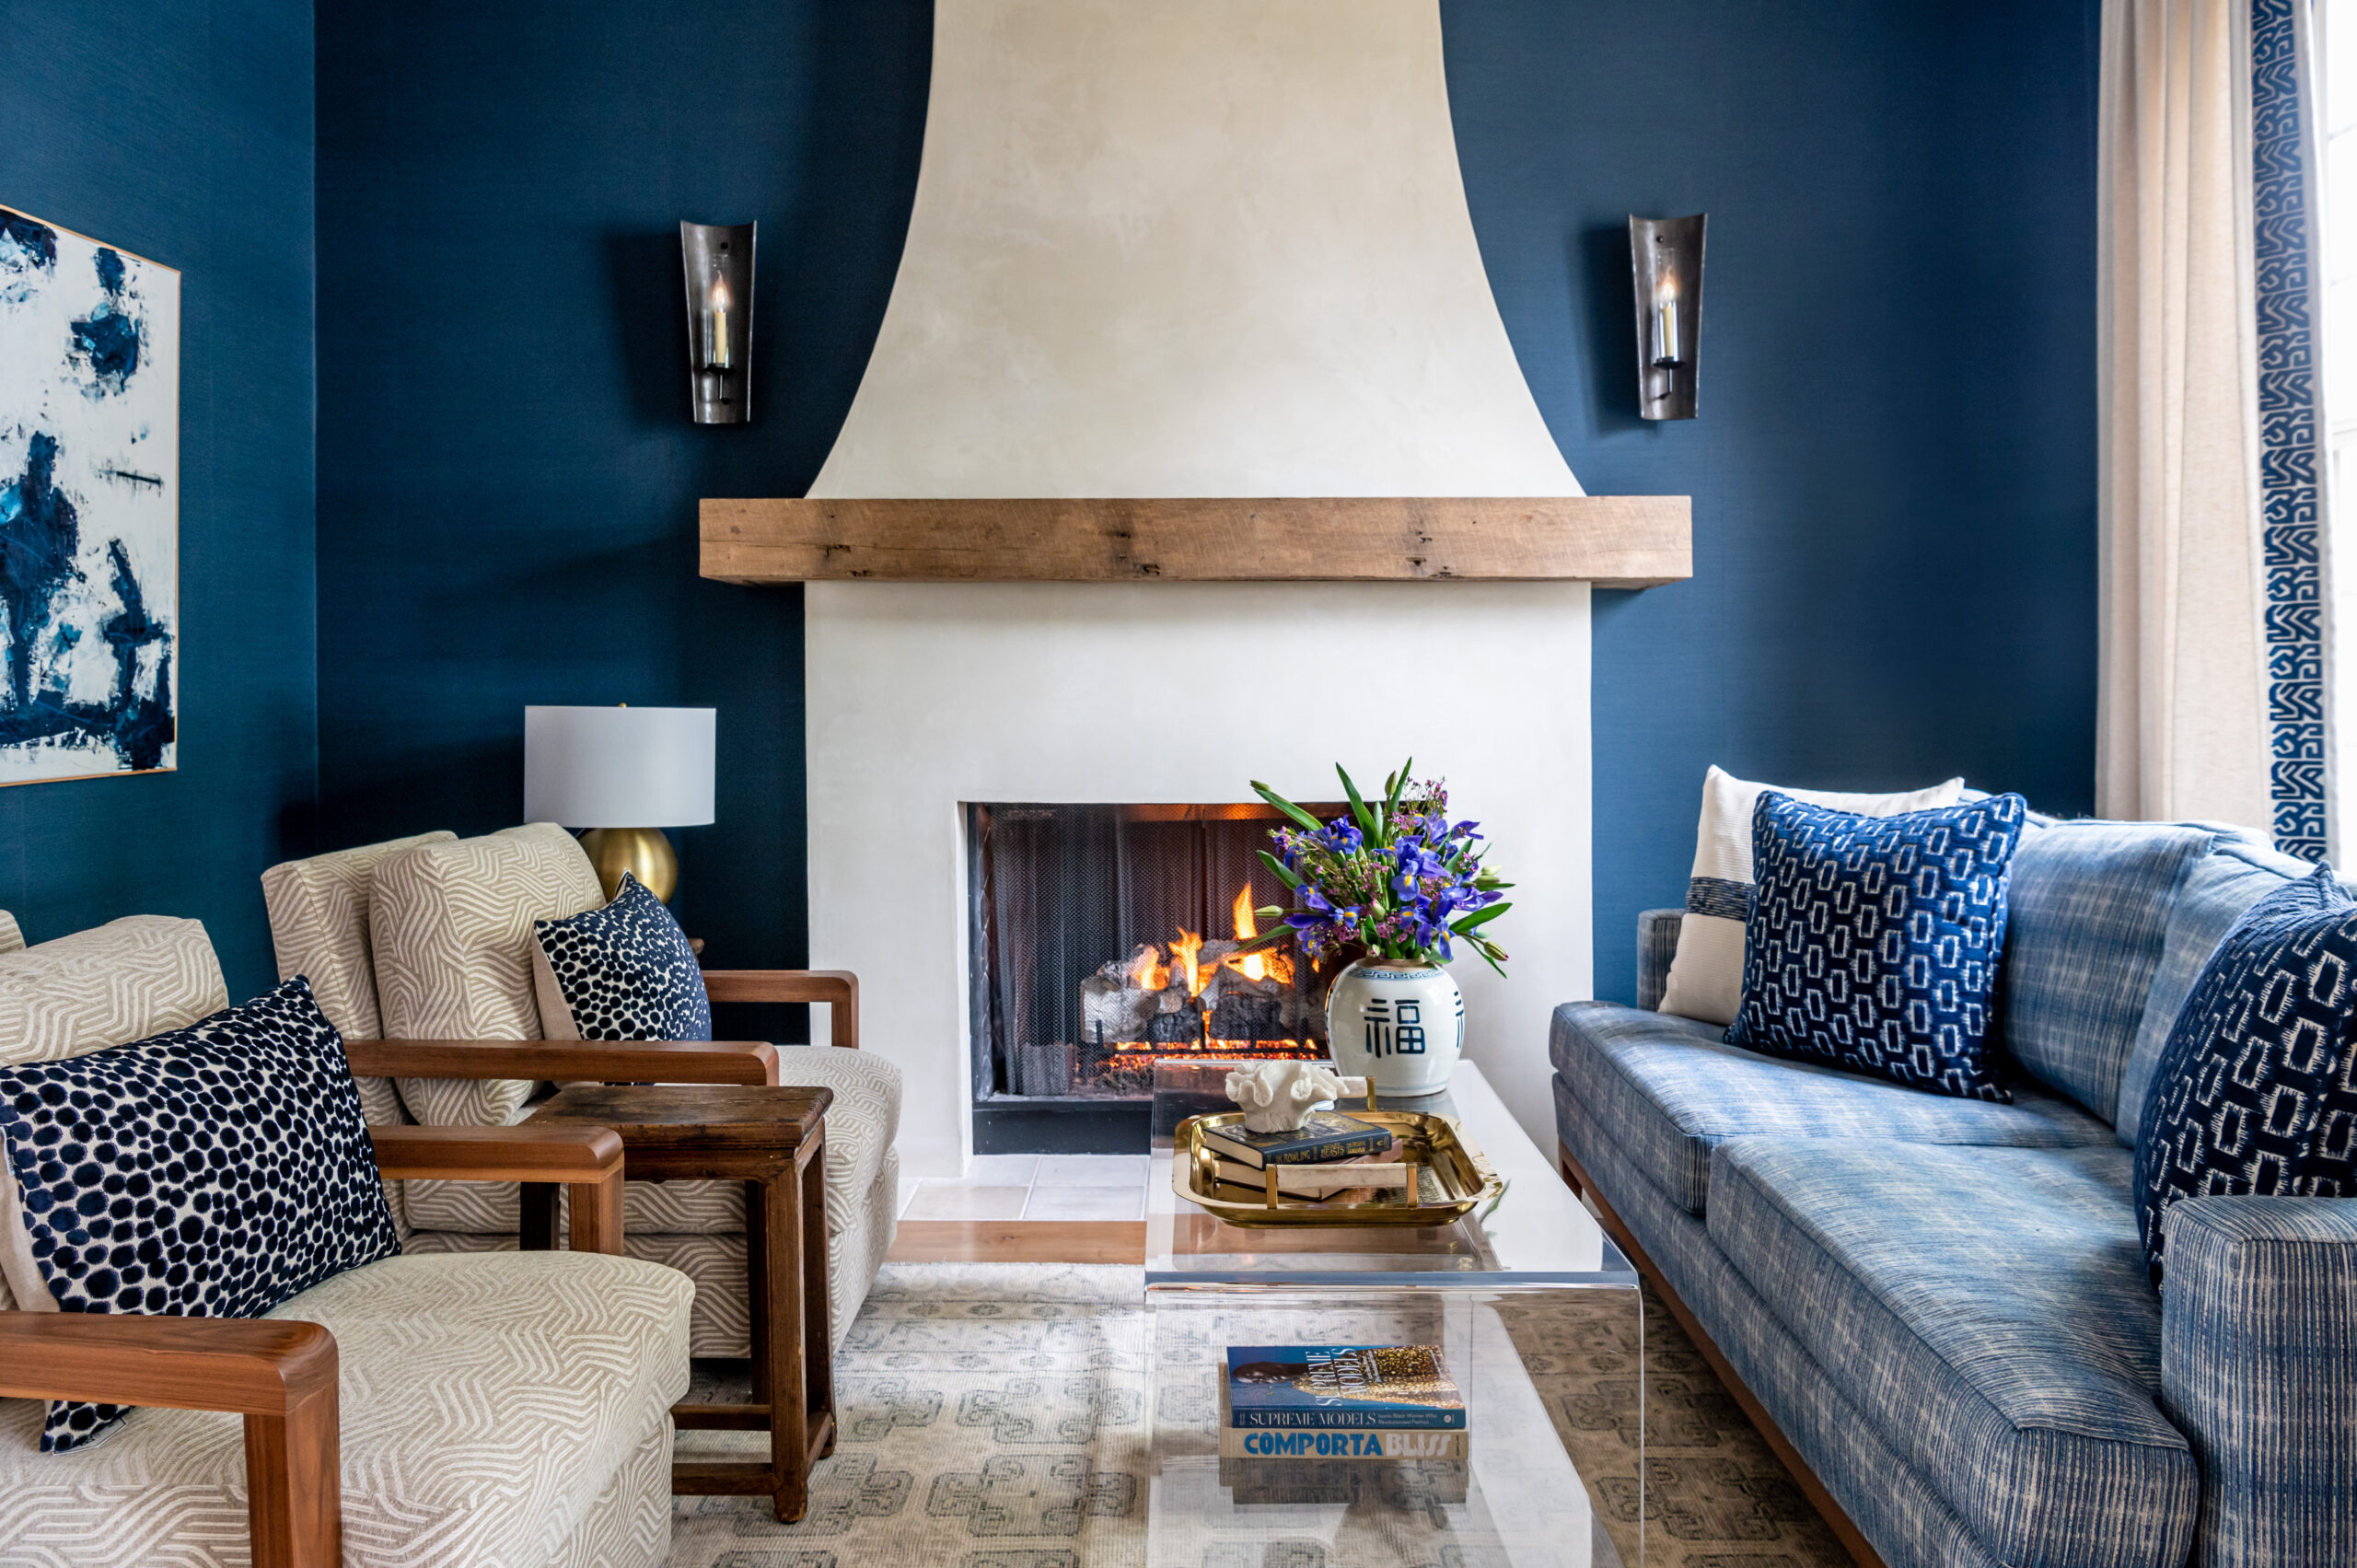 Interior design of living room with blue and colorful details